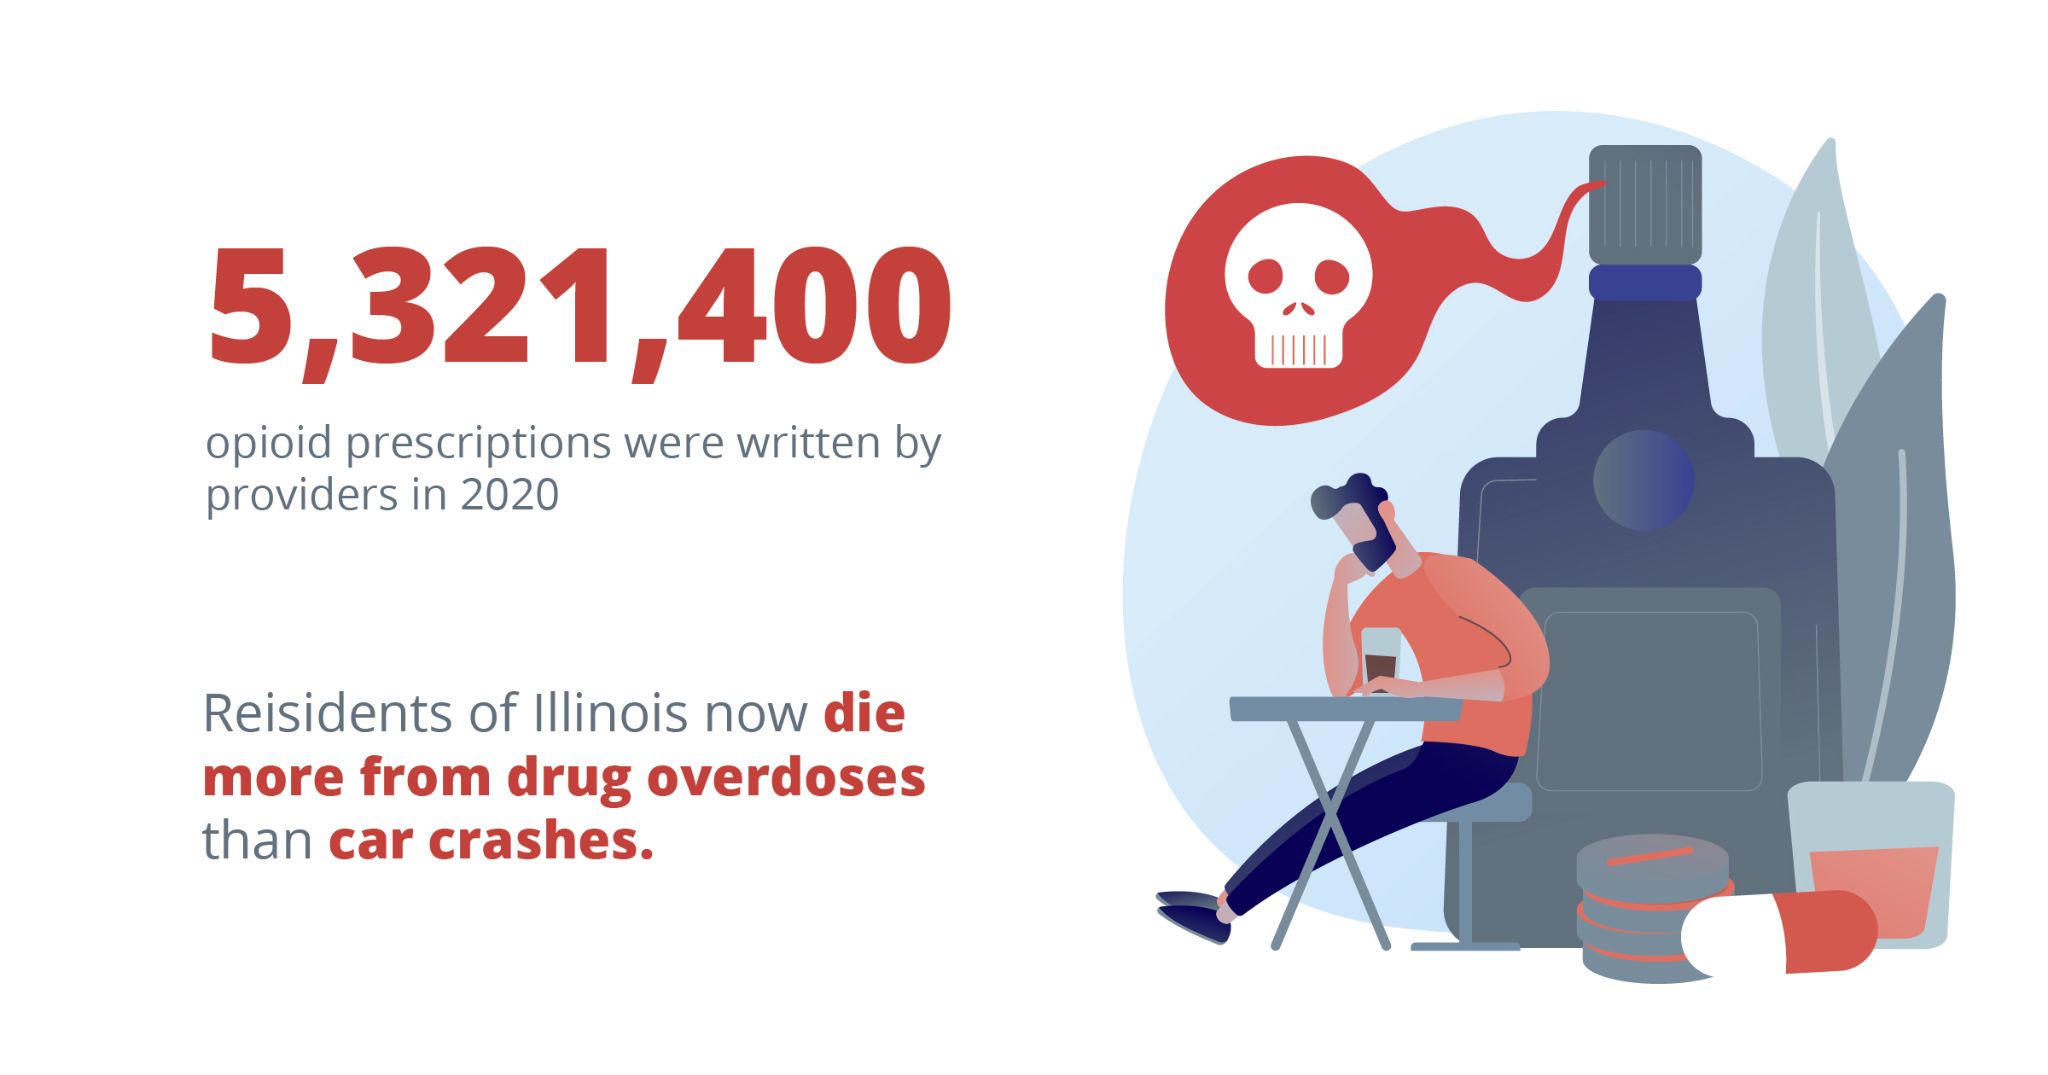 5,321,400 opioid prescriptions were written by providers in 2020. Residents of illinois now die more from drug overdoses than car crashes. Drug And Alcohol Detox & Rehab, Addiction Treatment Resources in Barrington Illinois